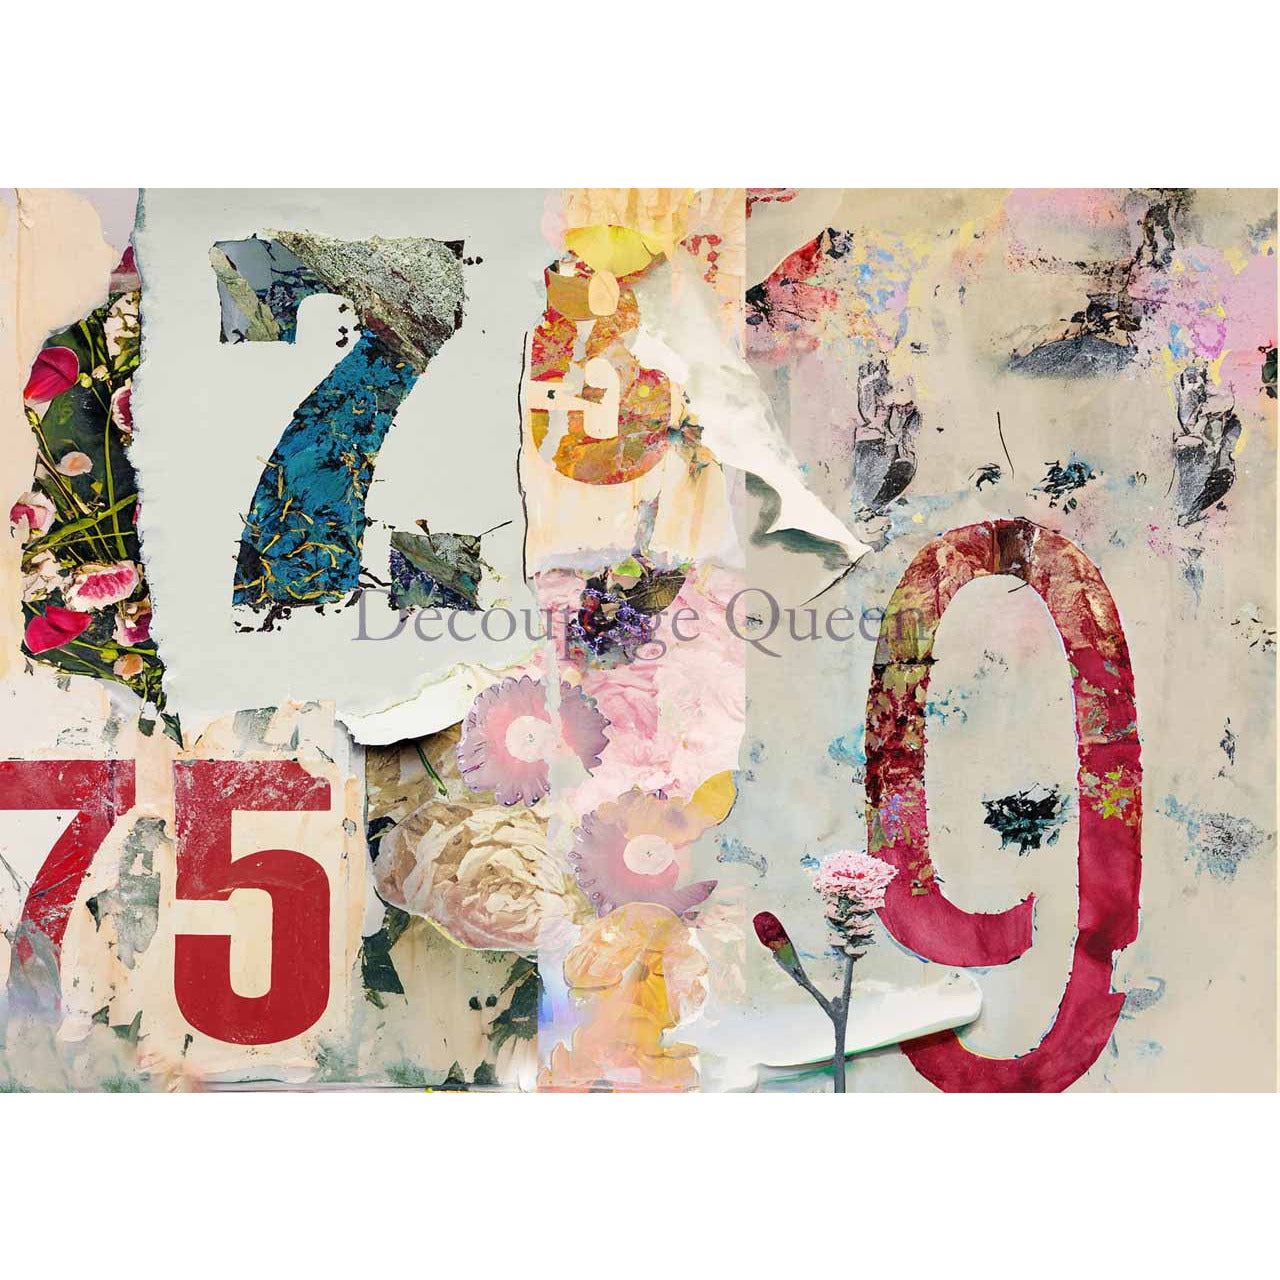 0441 - Rice Paper - Decoupage Queen - Andy Skinner Number Jumble